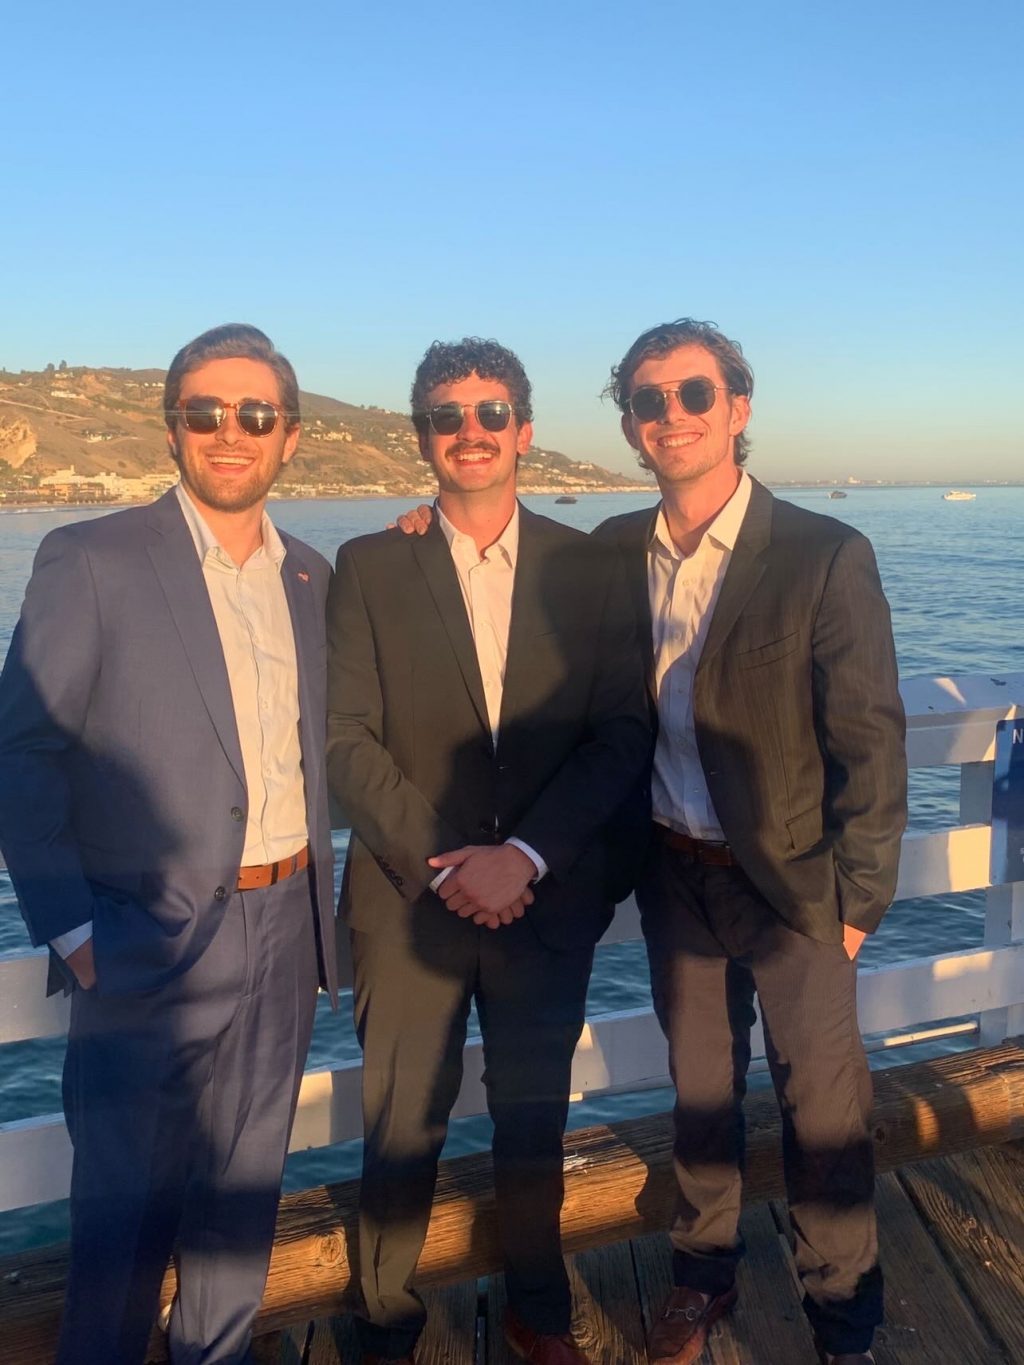 Will Noland poses with fellow Sig Ep's at Sig Ep formal on the Malibu Pier. Will's friends in Sig Ep said he always was there for his brothers. Photo Courtesy of Sigma Phi Epsilon